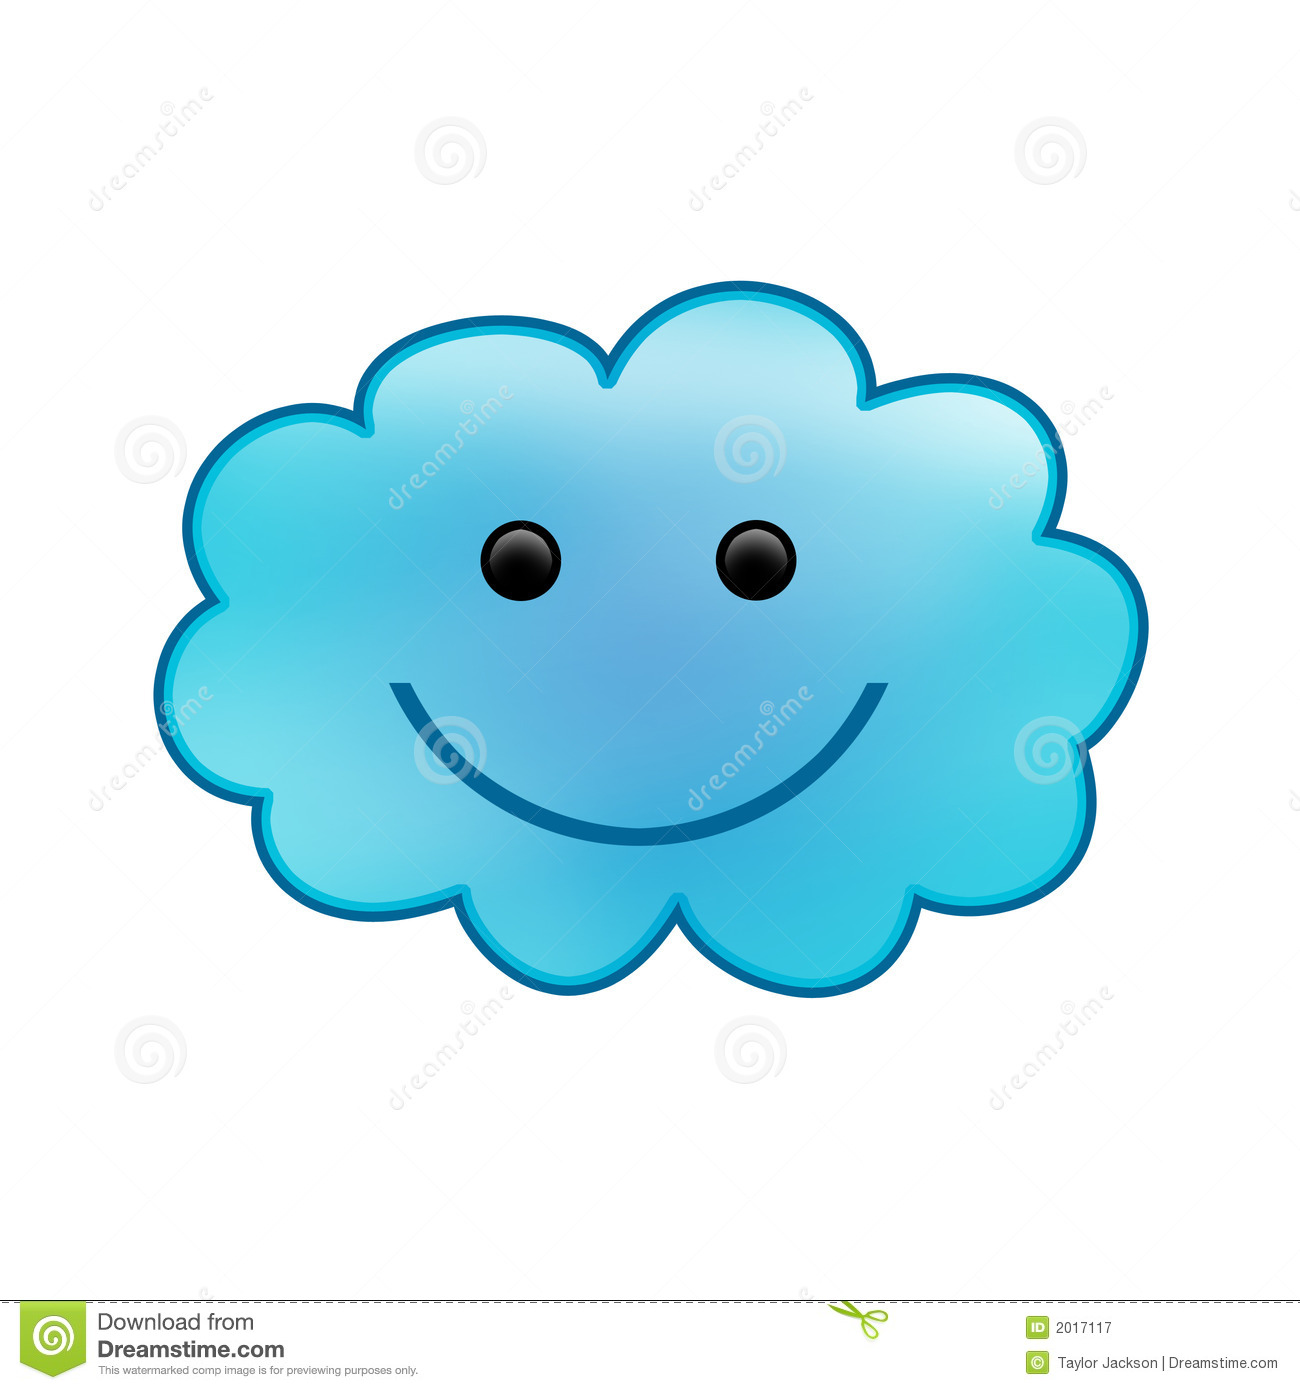 Smiling Cloud Royalty Free Stock Photography   Image  2017117